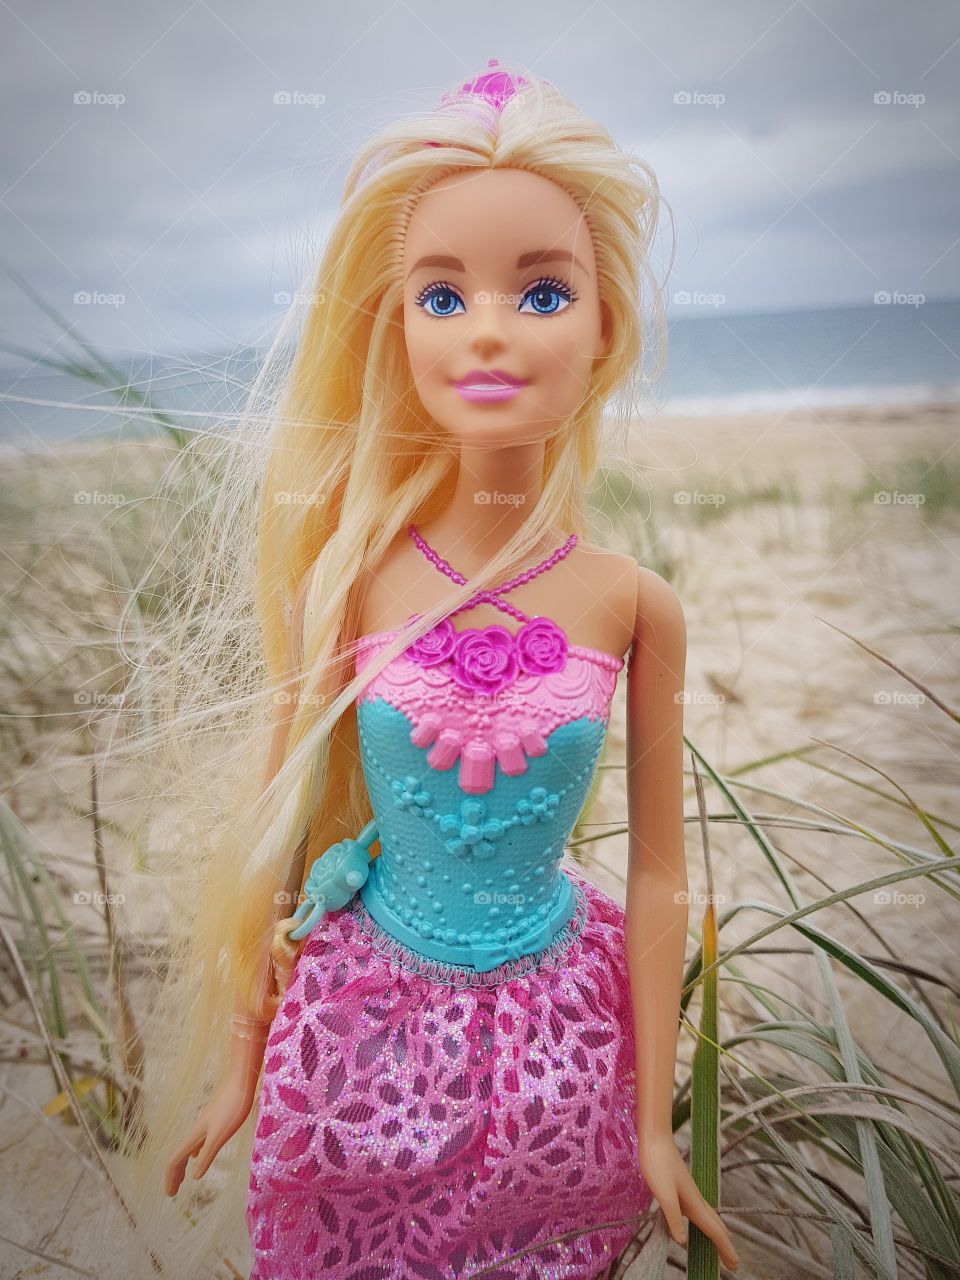 Barbie, barbie at the beach sunny day